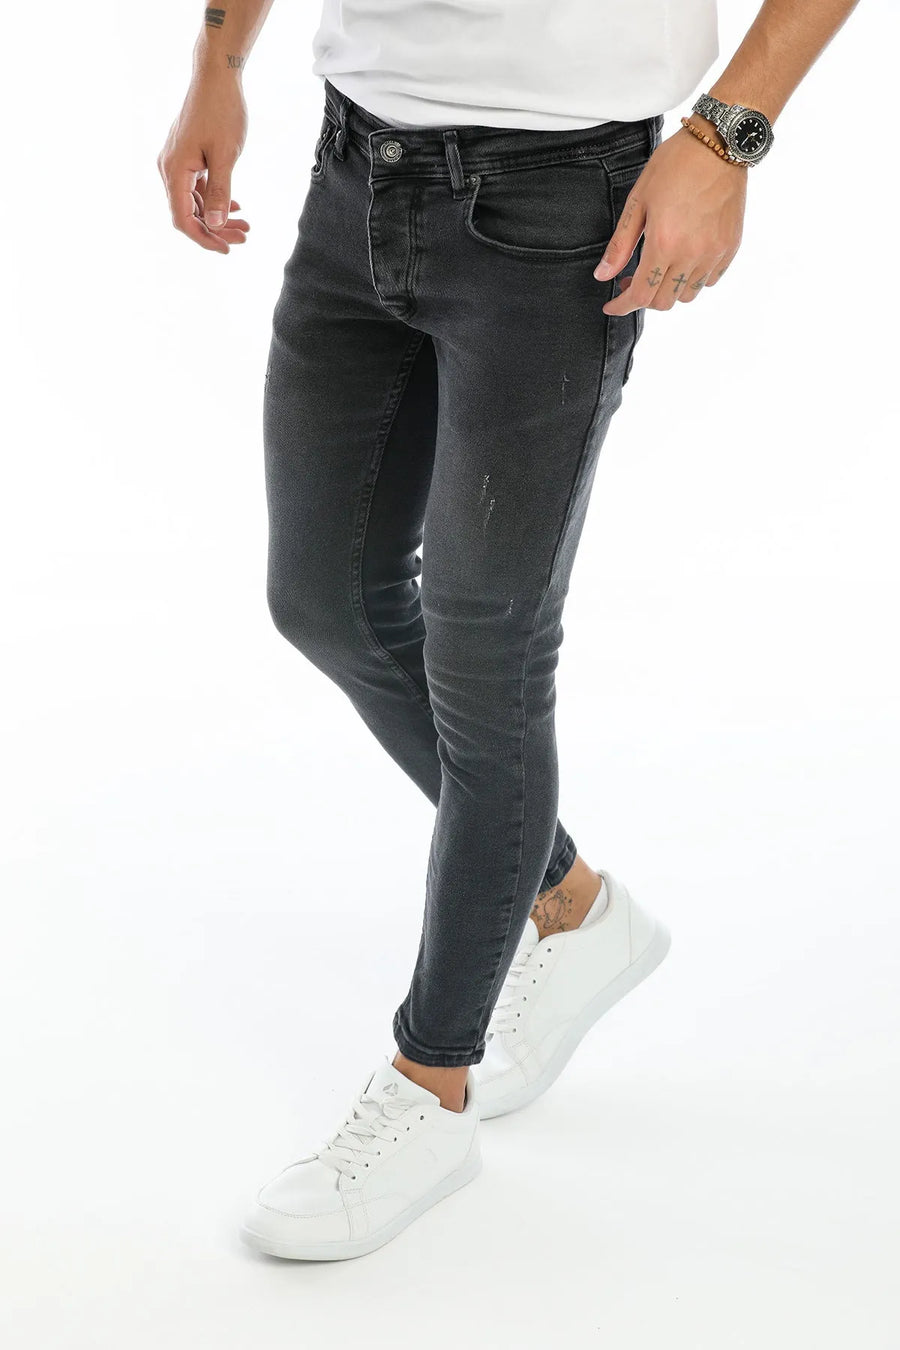 Anthracite Skinny Jeans DDR8007